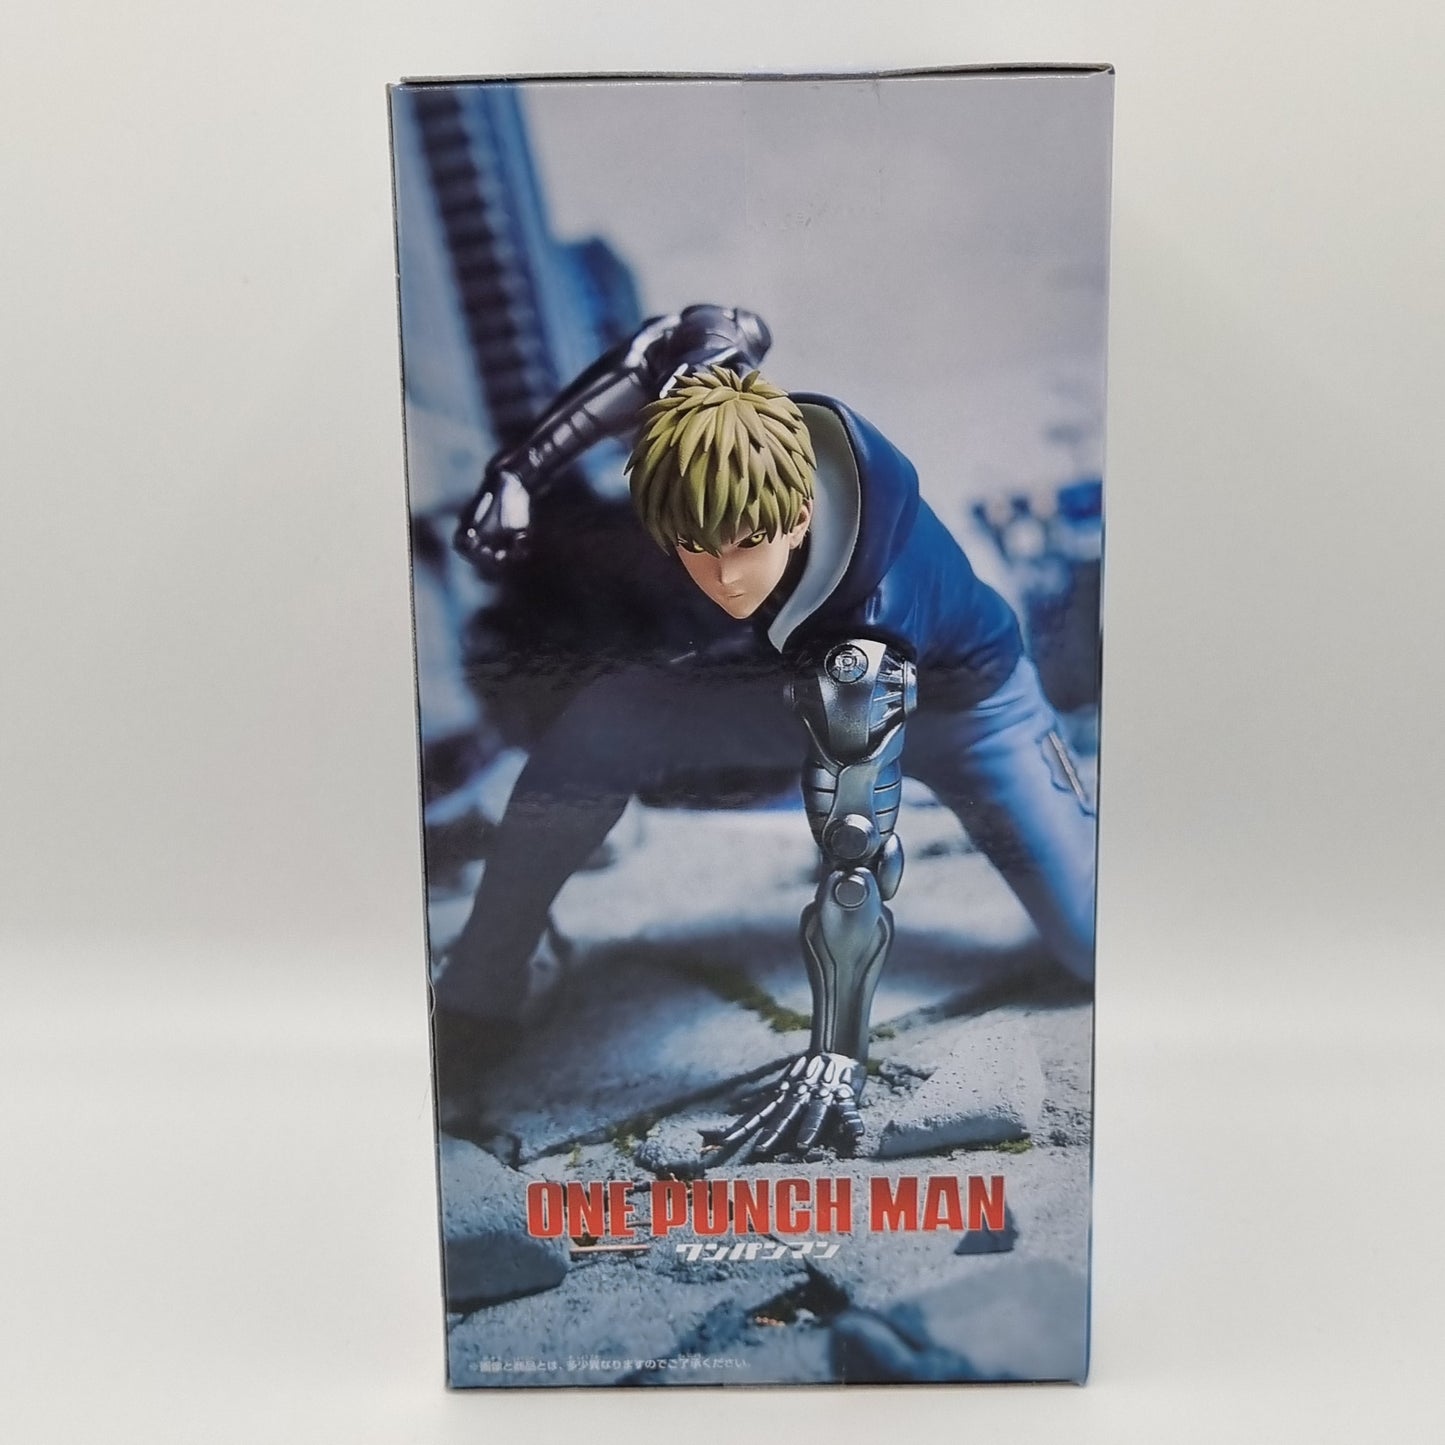 Anime Store, Bandai One Punch Man Genos Vol 2, Side View Packaging